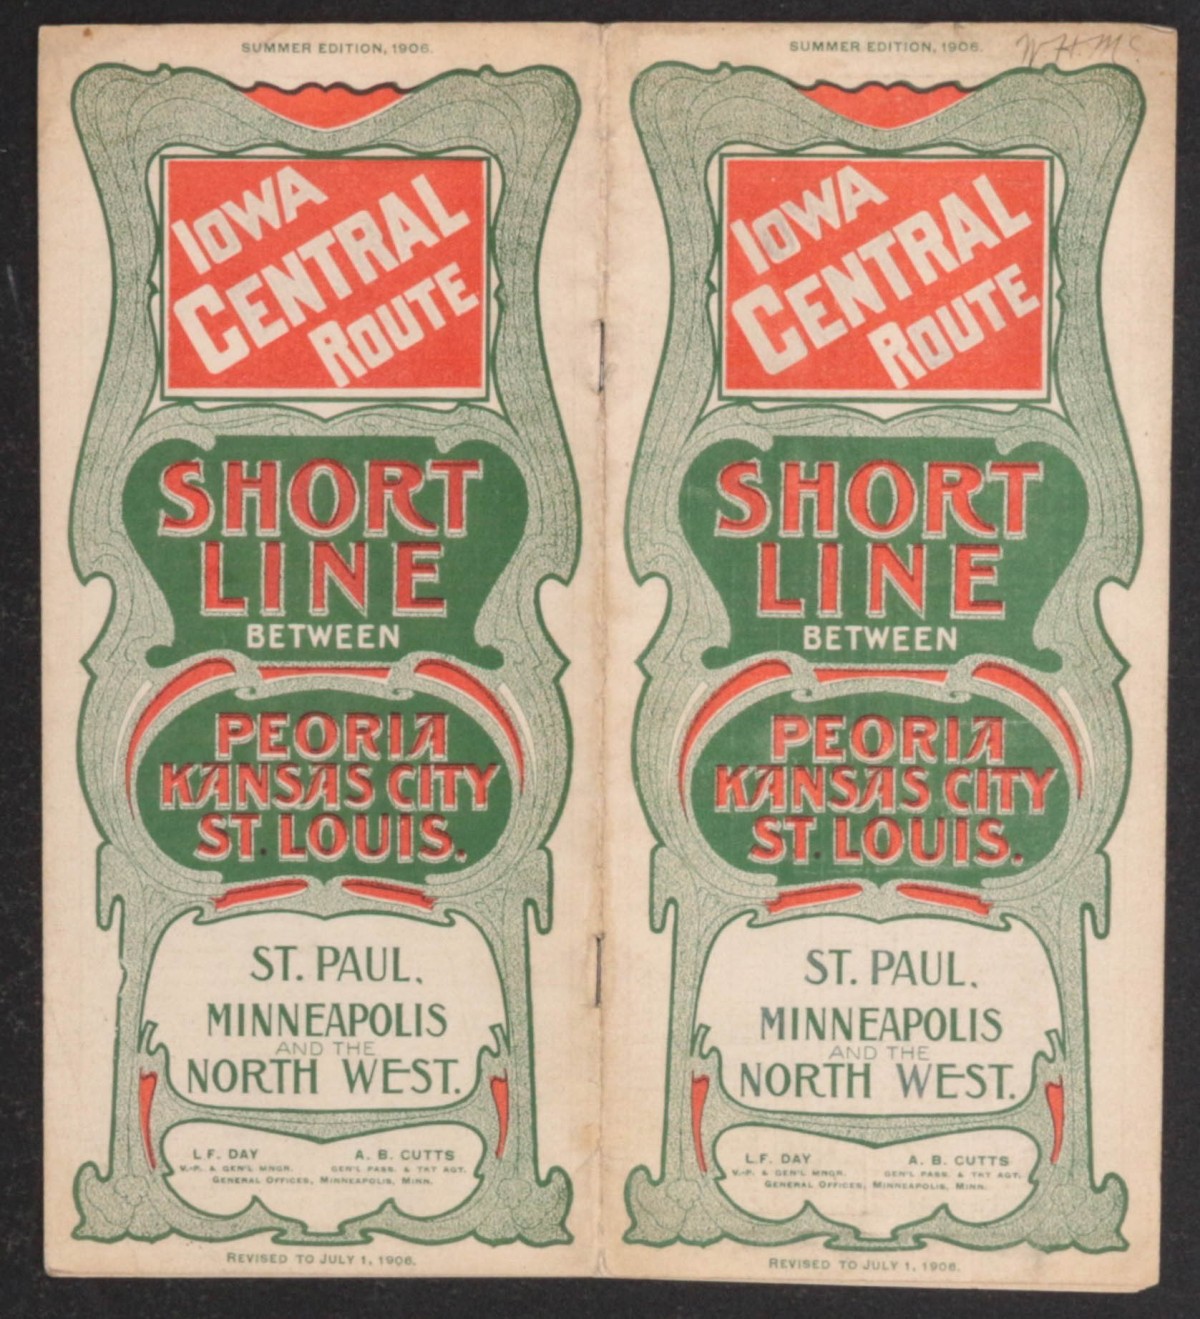 IOWA CENTRAL RTE. SHORT LINE TIMETABLE FOR 1906